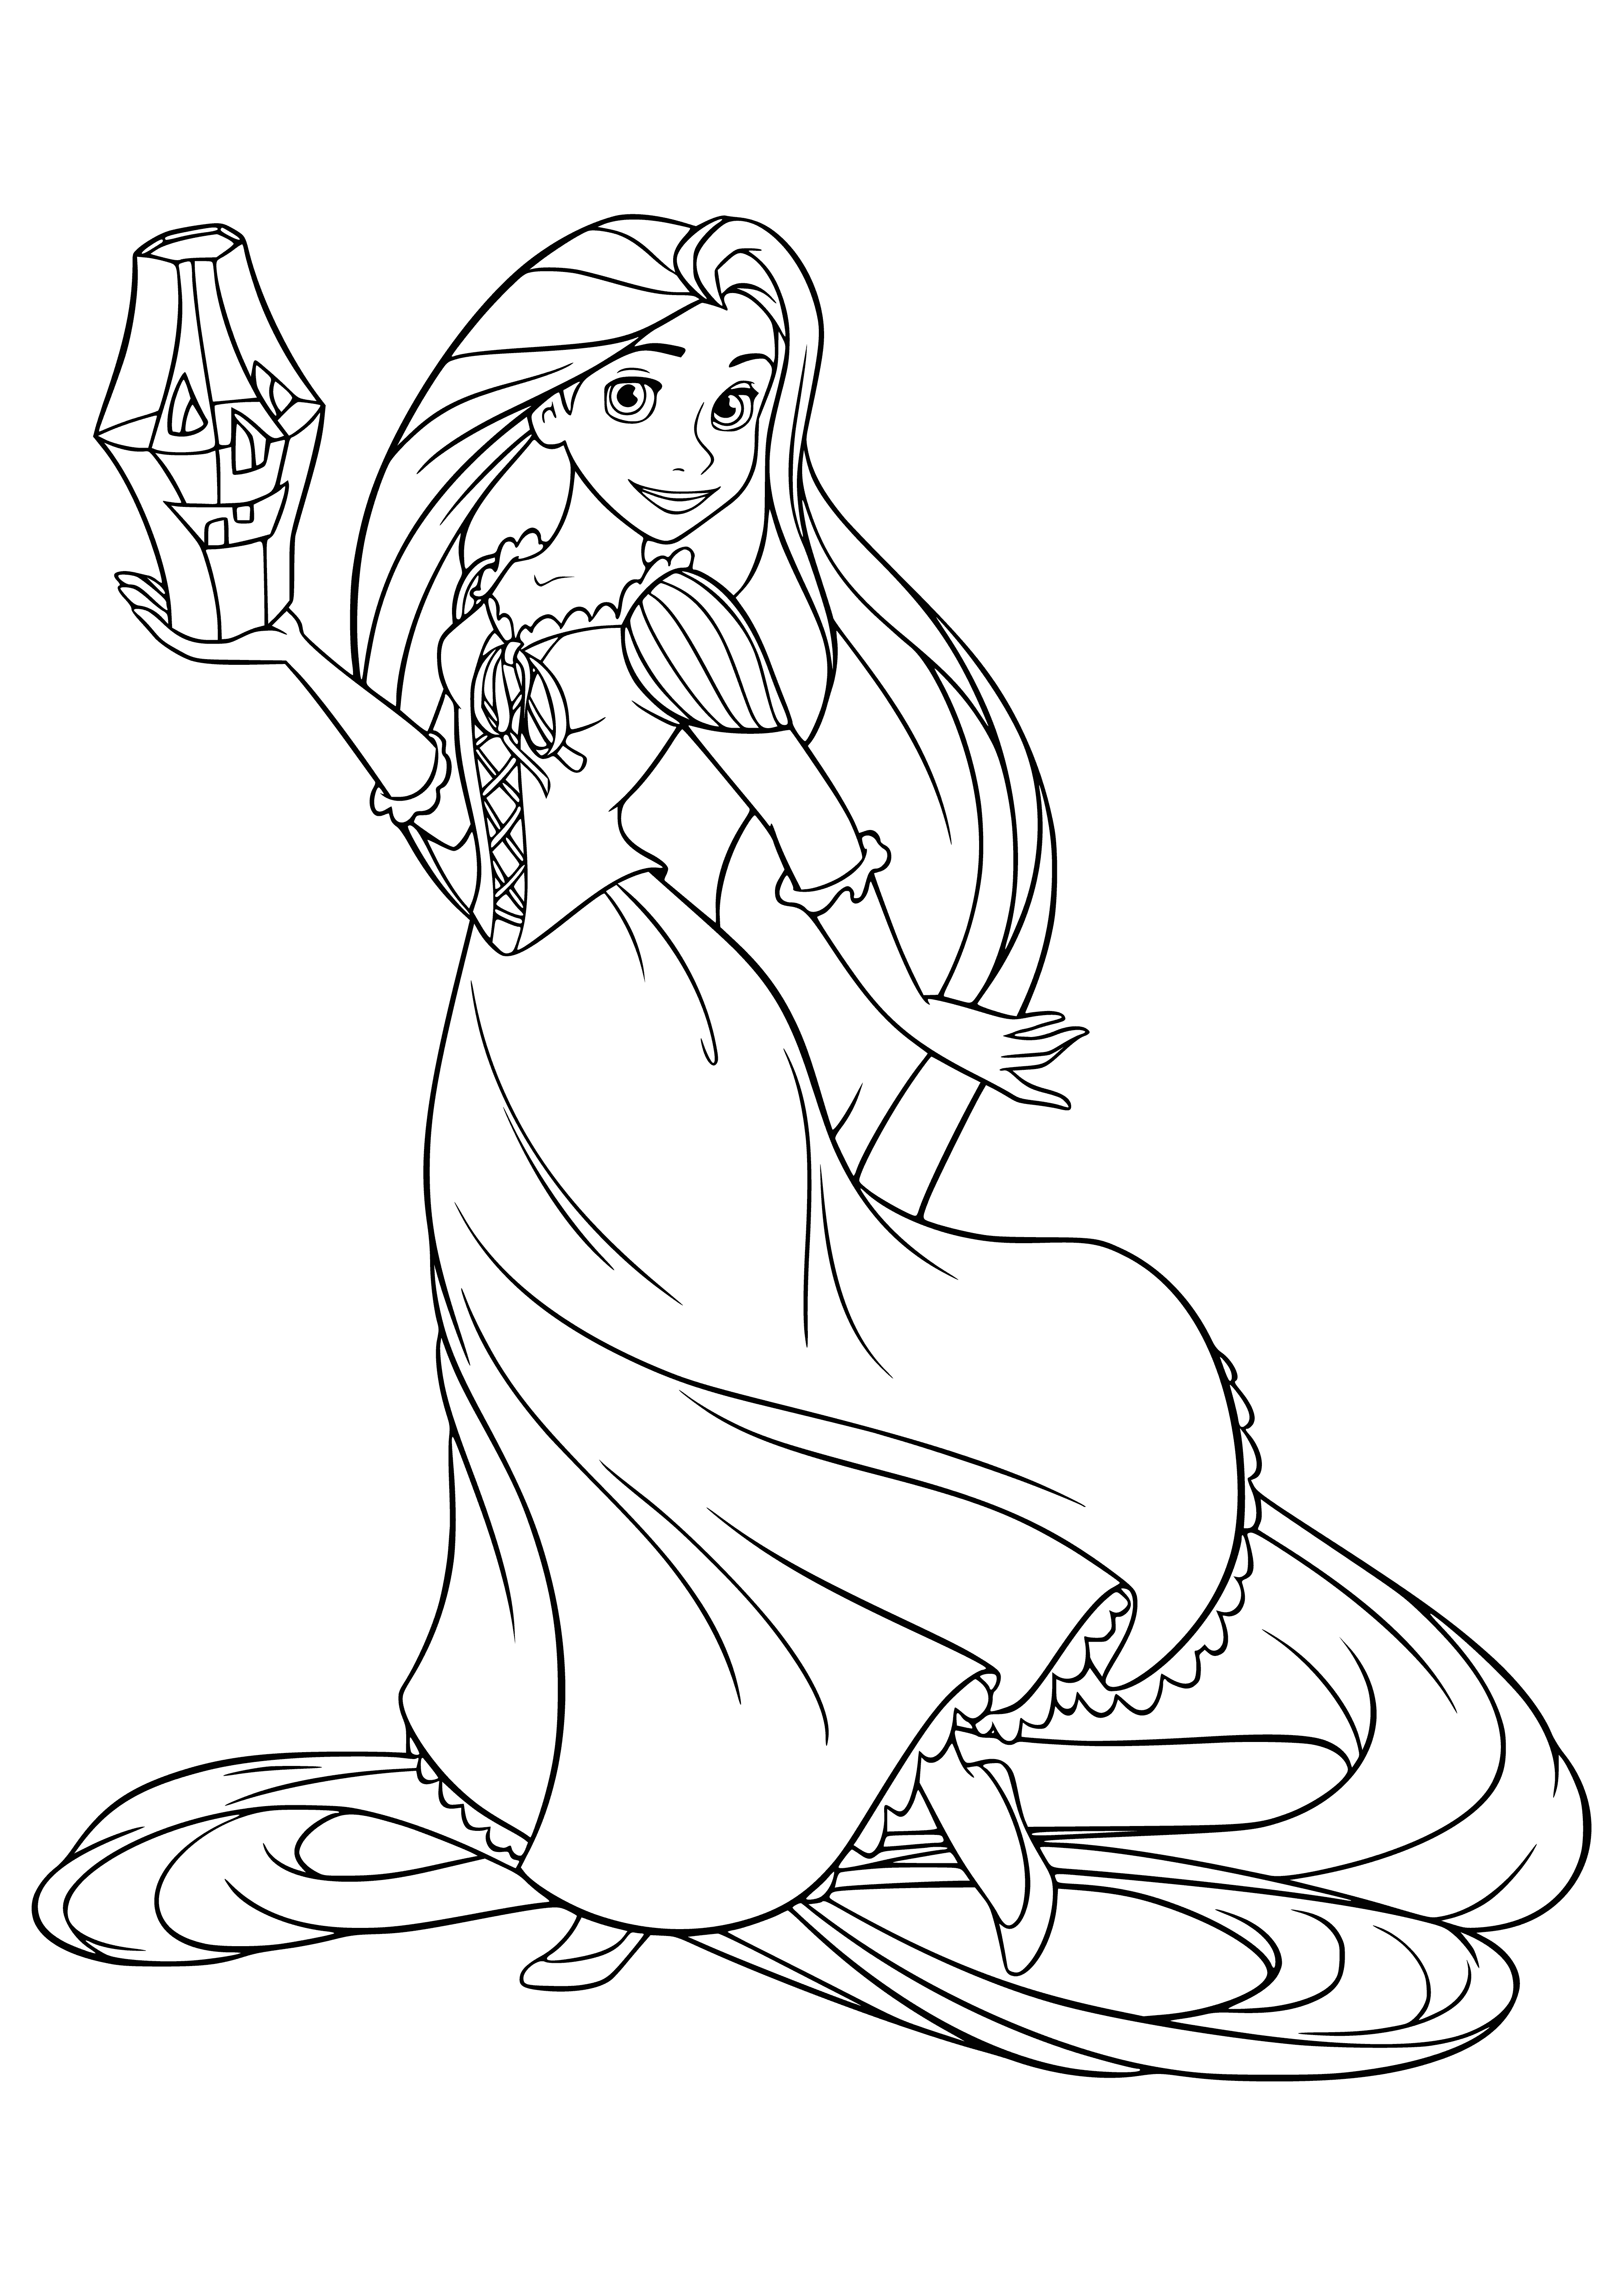 coloring page: Girl in purple dress & black cape holds pumpkin on doorstep, a black cat at her feet. #Halloween #Rapunzel #coloringpage